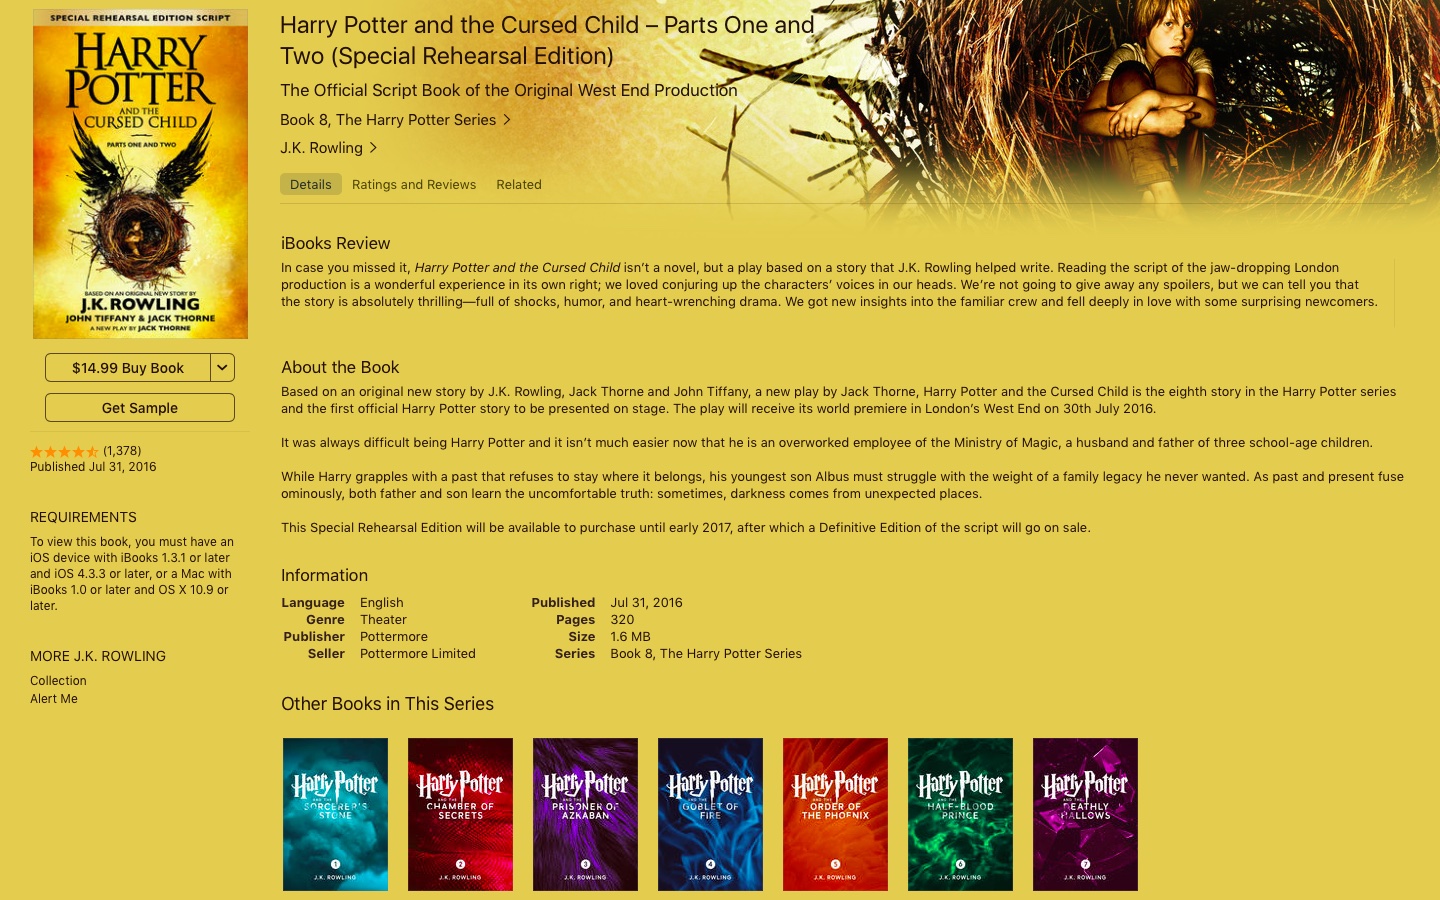 Harry Potter and the Cursed Child iBooks Store screenshot 001